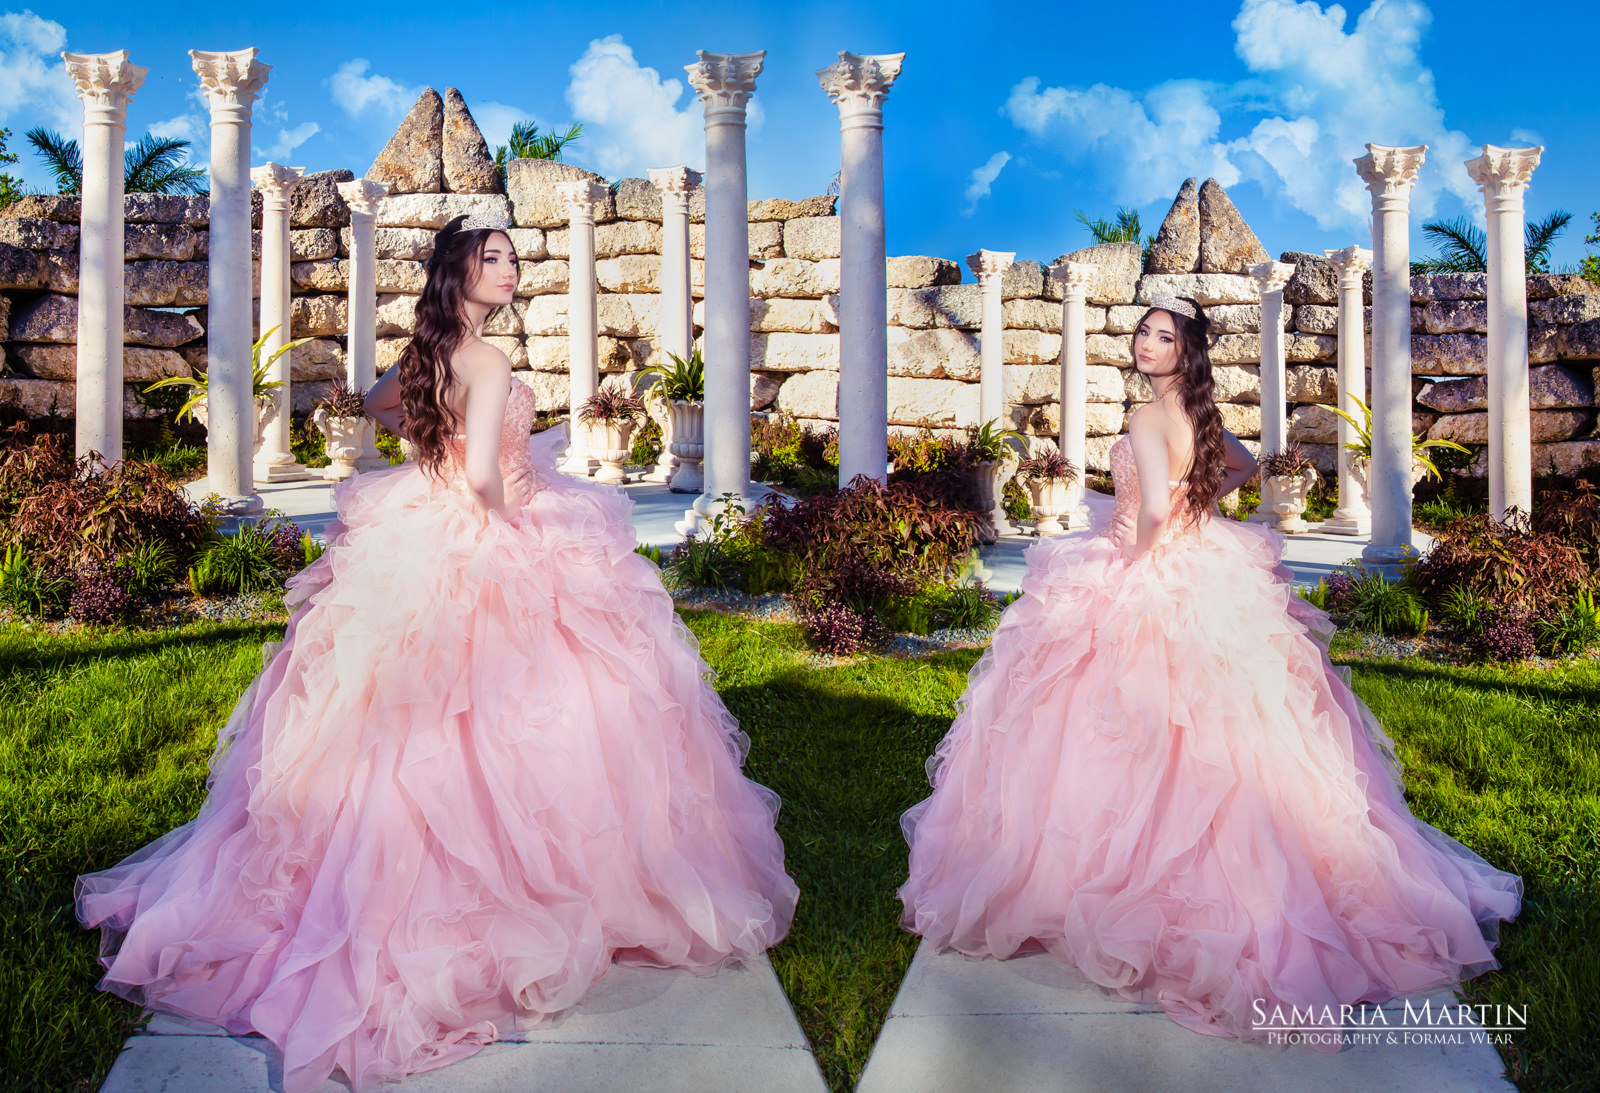 Sweet 15 Photography Packages, Quinceanera Pictures, Quinceanera photo Studio, Sweet 15 Pictures, Quinceanera Beach Pictures, Underwater Quinceañera Pictures, Professional Quinceañera Photography,